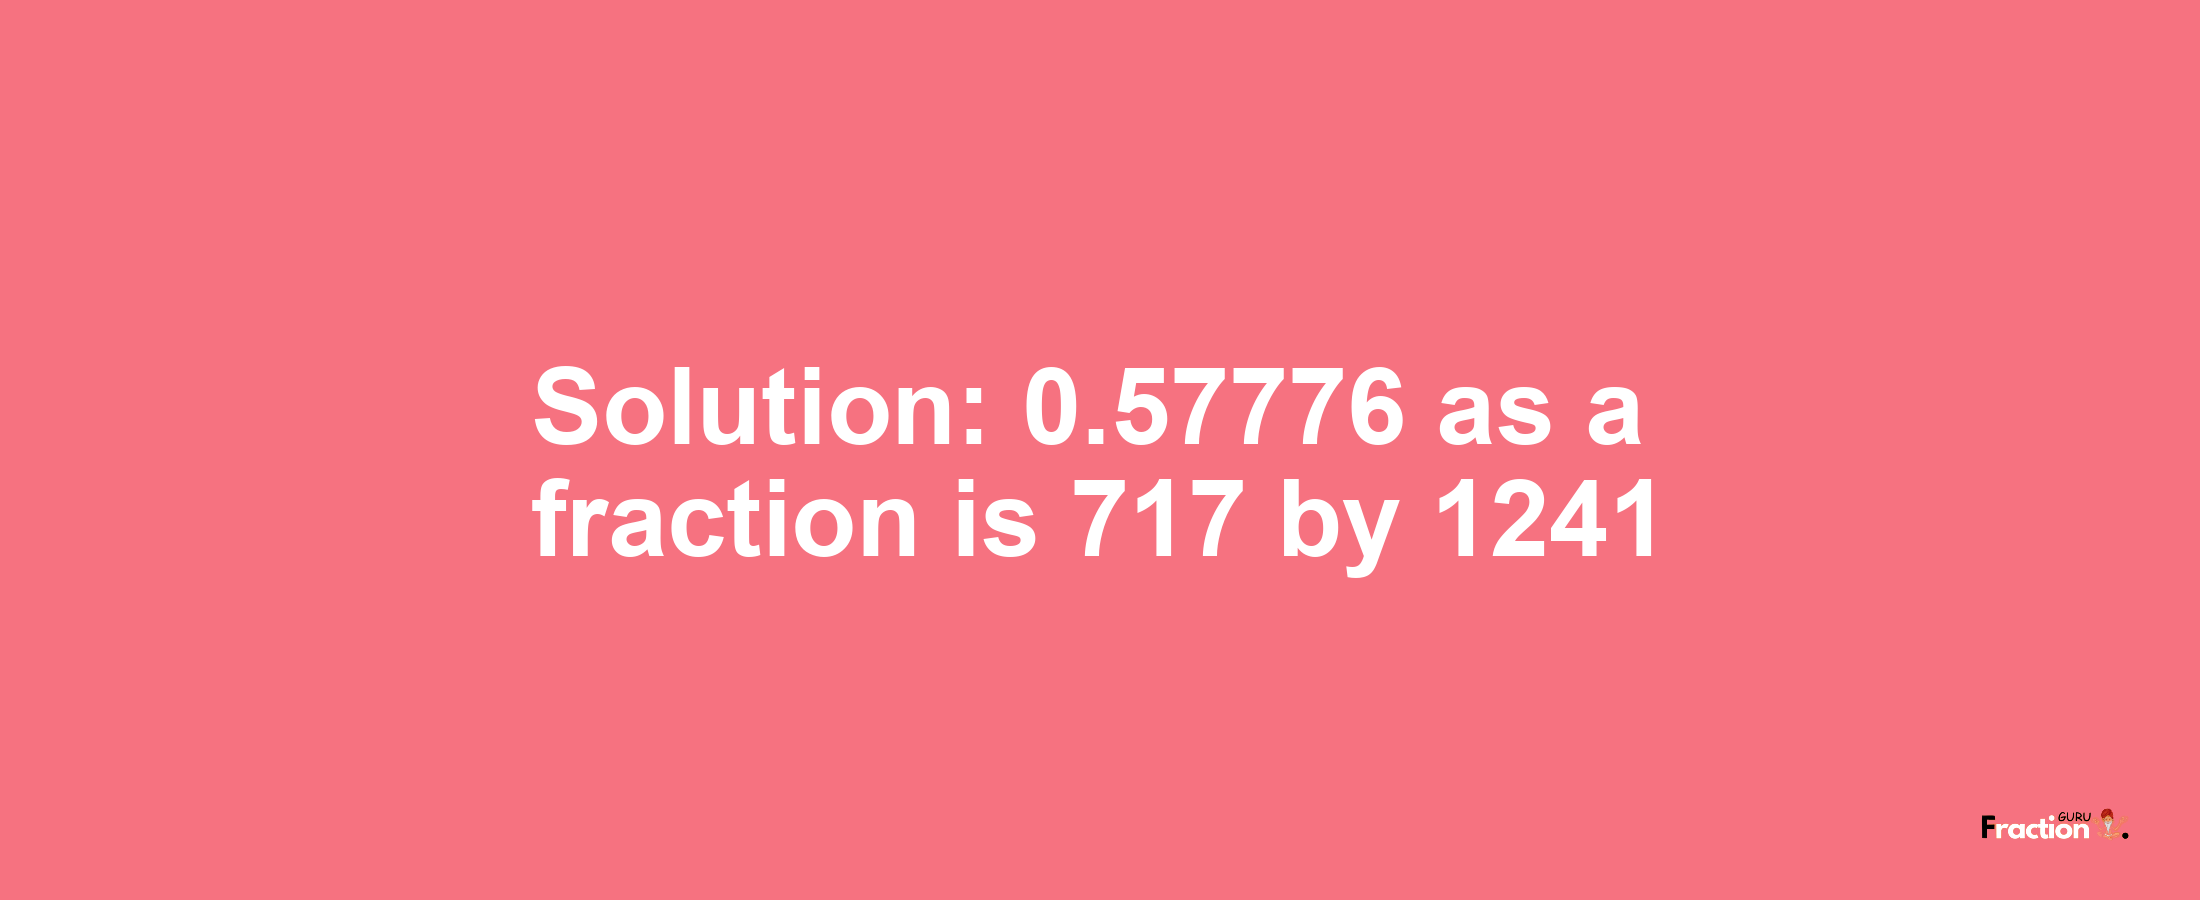 Solution:0.57776 as a fraction is 717/1241